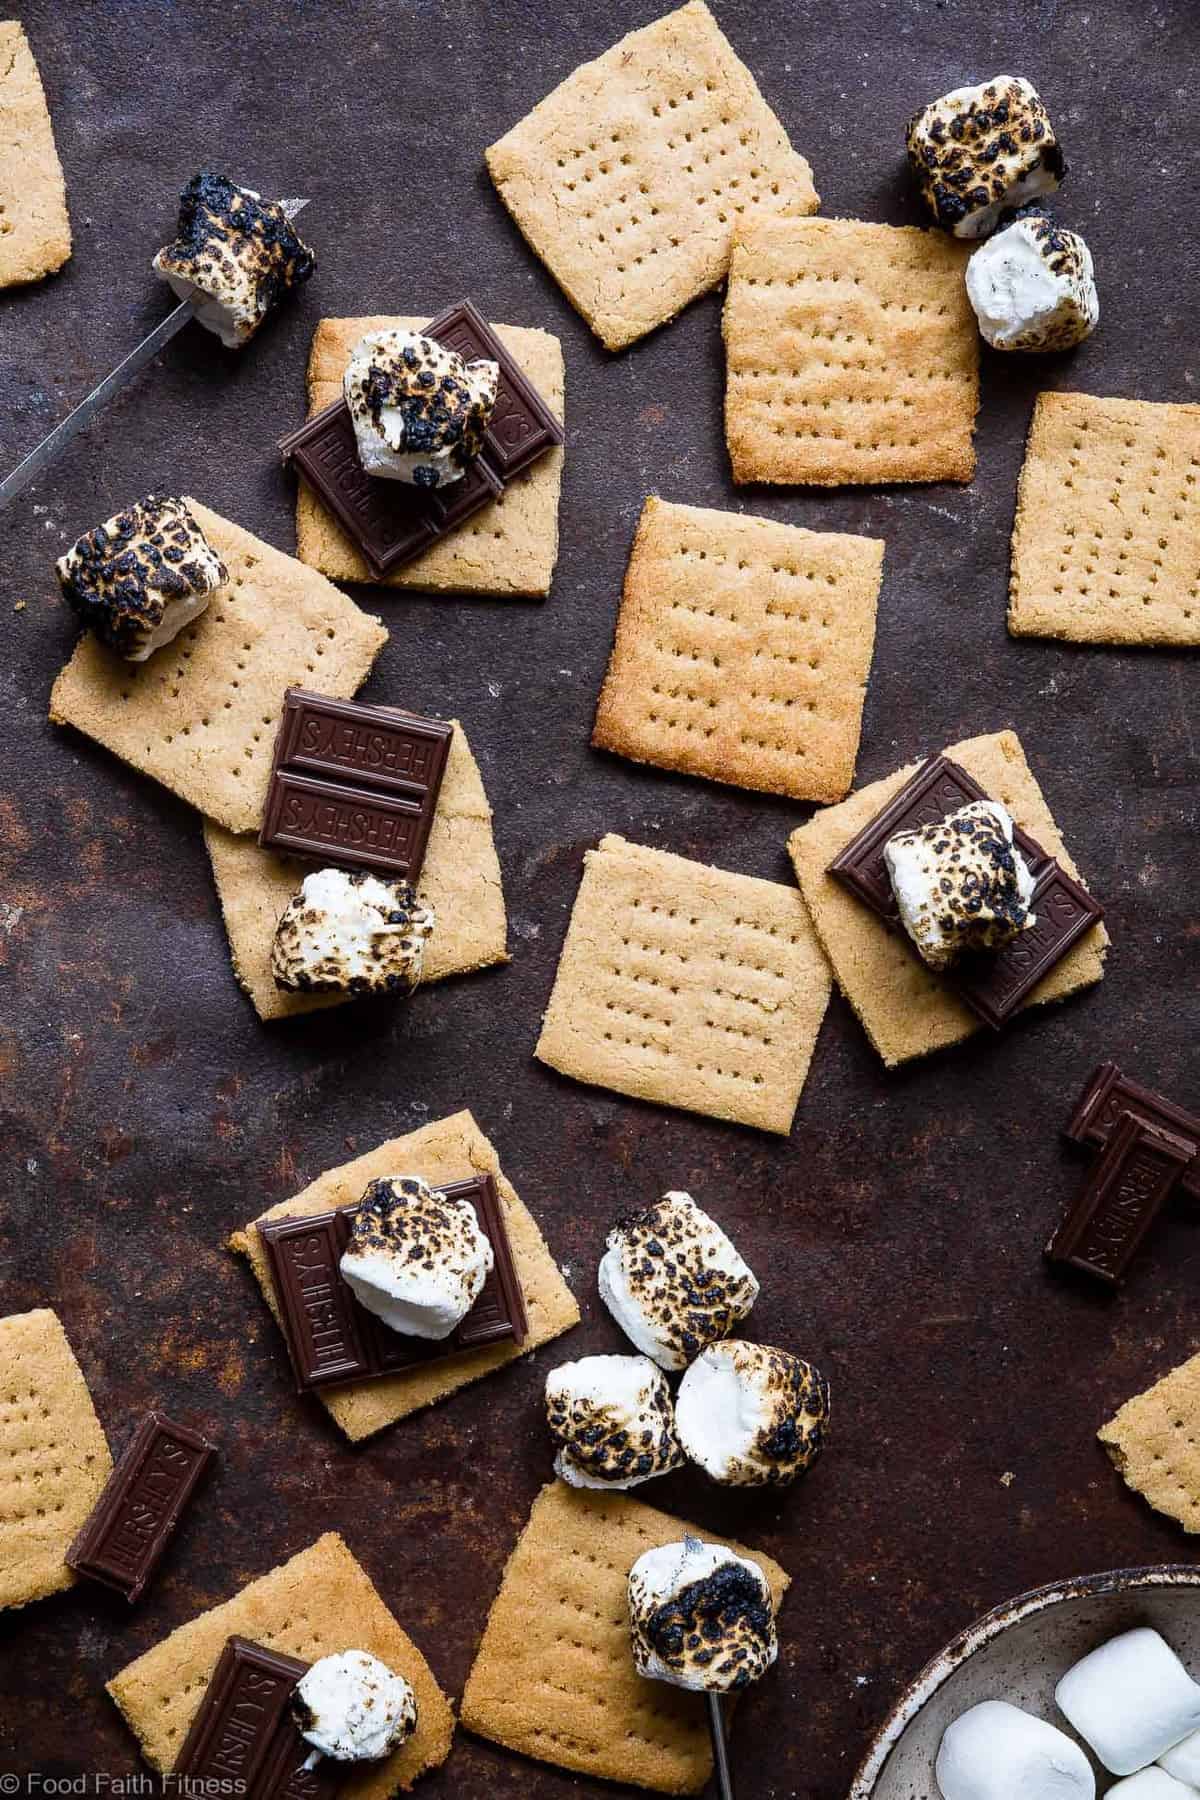 Low Carb Gluten Free Graham Crackers with Almond Flour - These healthy, homemade keto graham crackers are SO much better than store bought that you'll never believe they are paleo friendly, sugar free and only 6 simple ingredients! | #Foodfaithfitness | #Keto #LowCarb #Glutenfree #paleo #Healthy